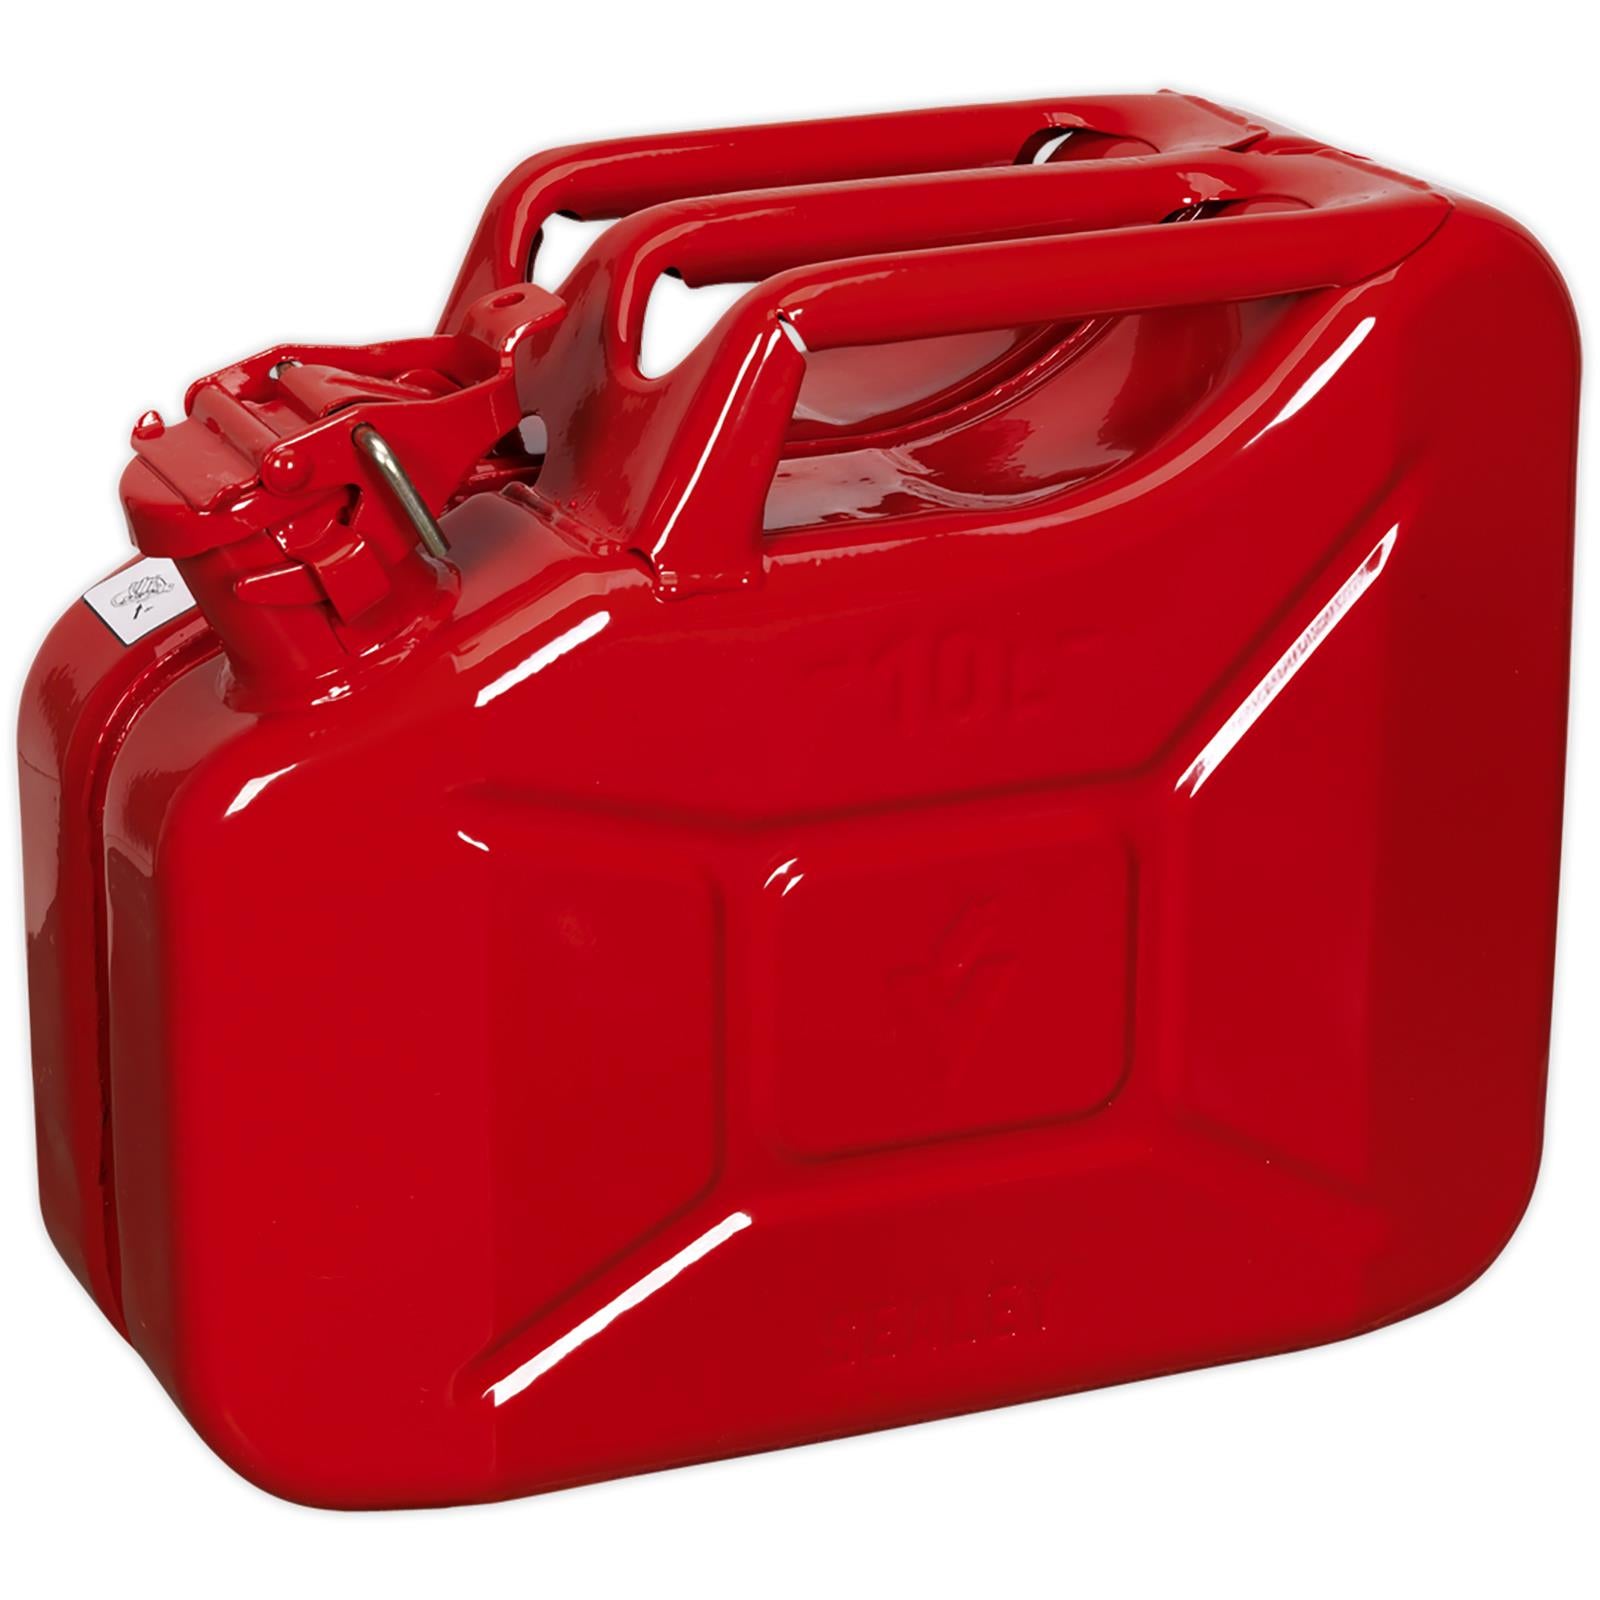 Sealey Jerry Can 10L Red Fuel Tank